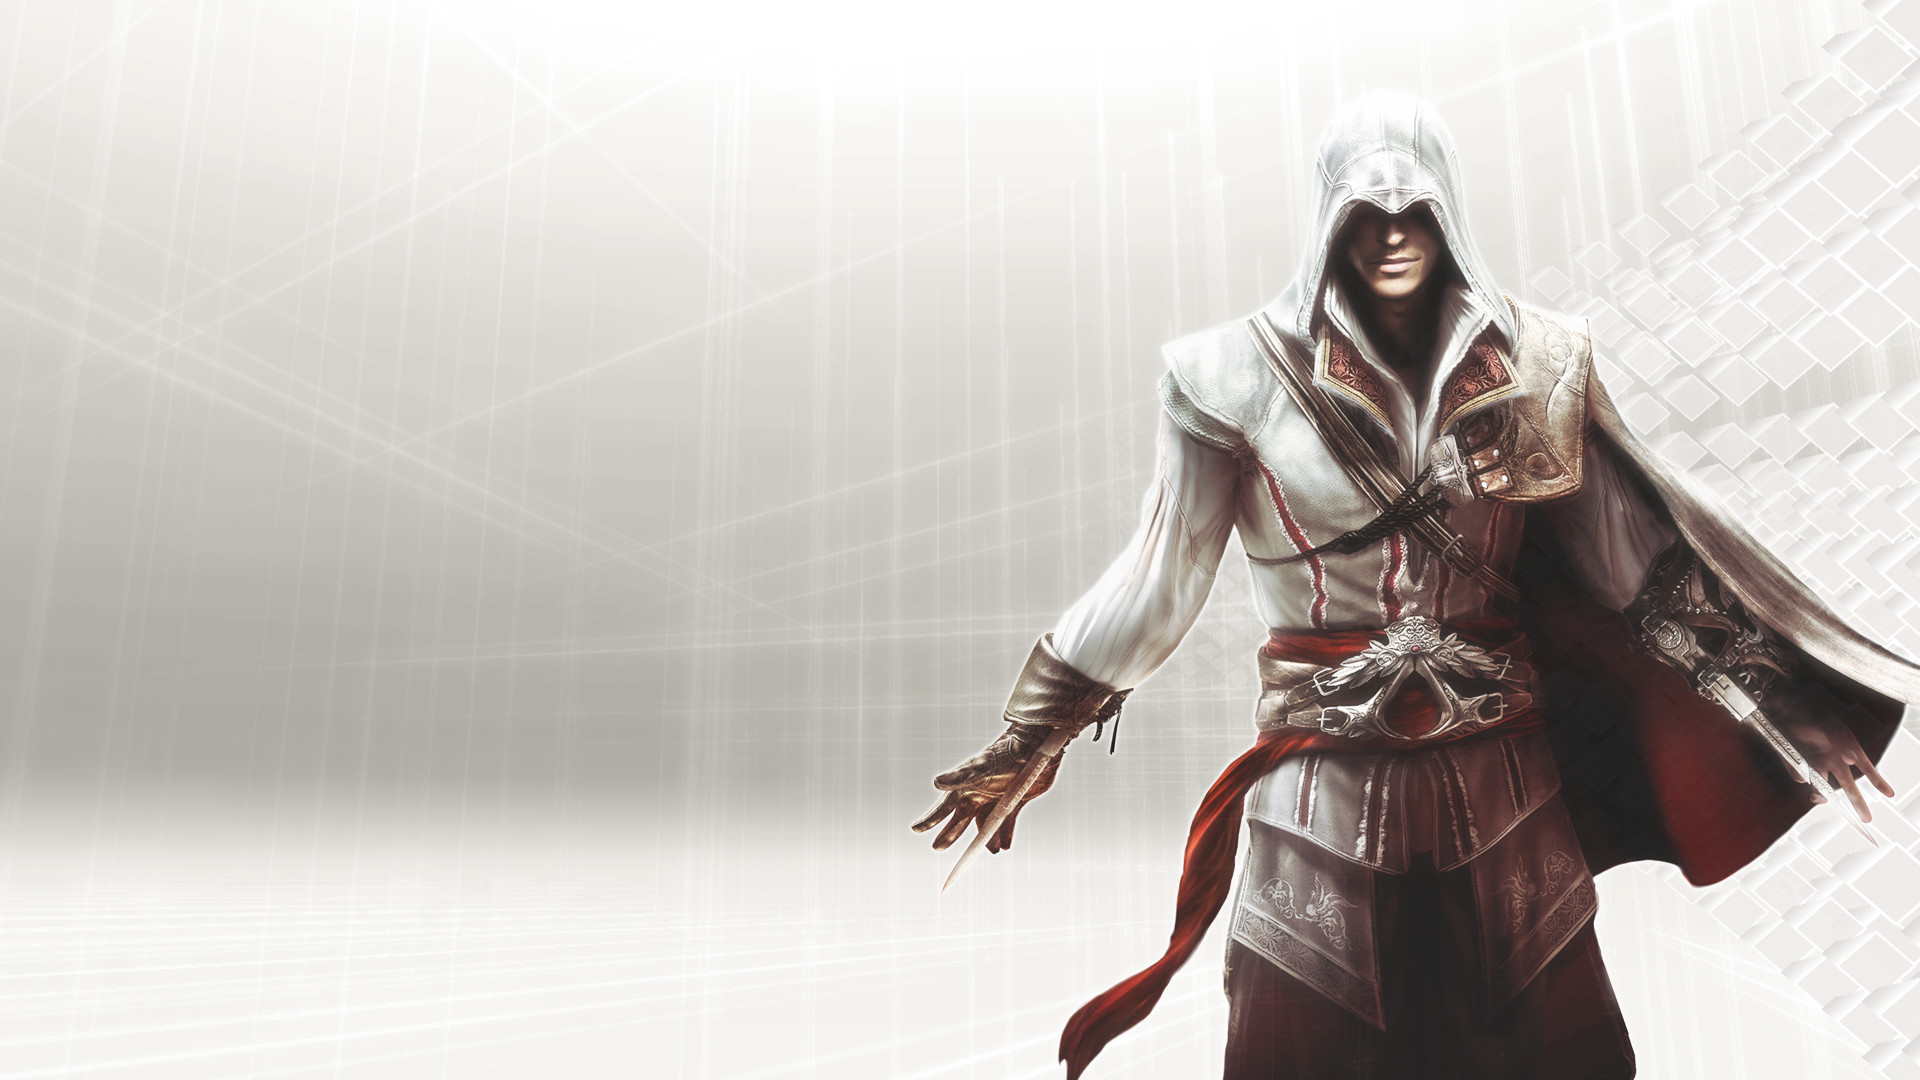 1920x1080 Assassin's Creed video game characters HD Wallpaper -  http://www.hdwallpaperuniverse.com/assassins-creed-video-game-characters-hd- wallpaper/ | Pinterest ...